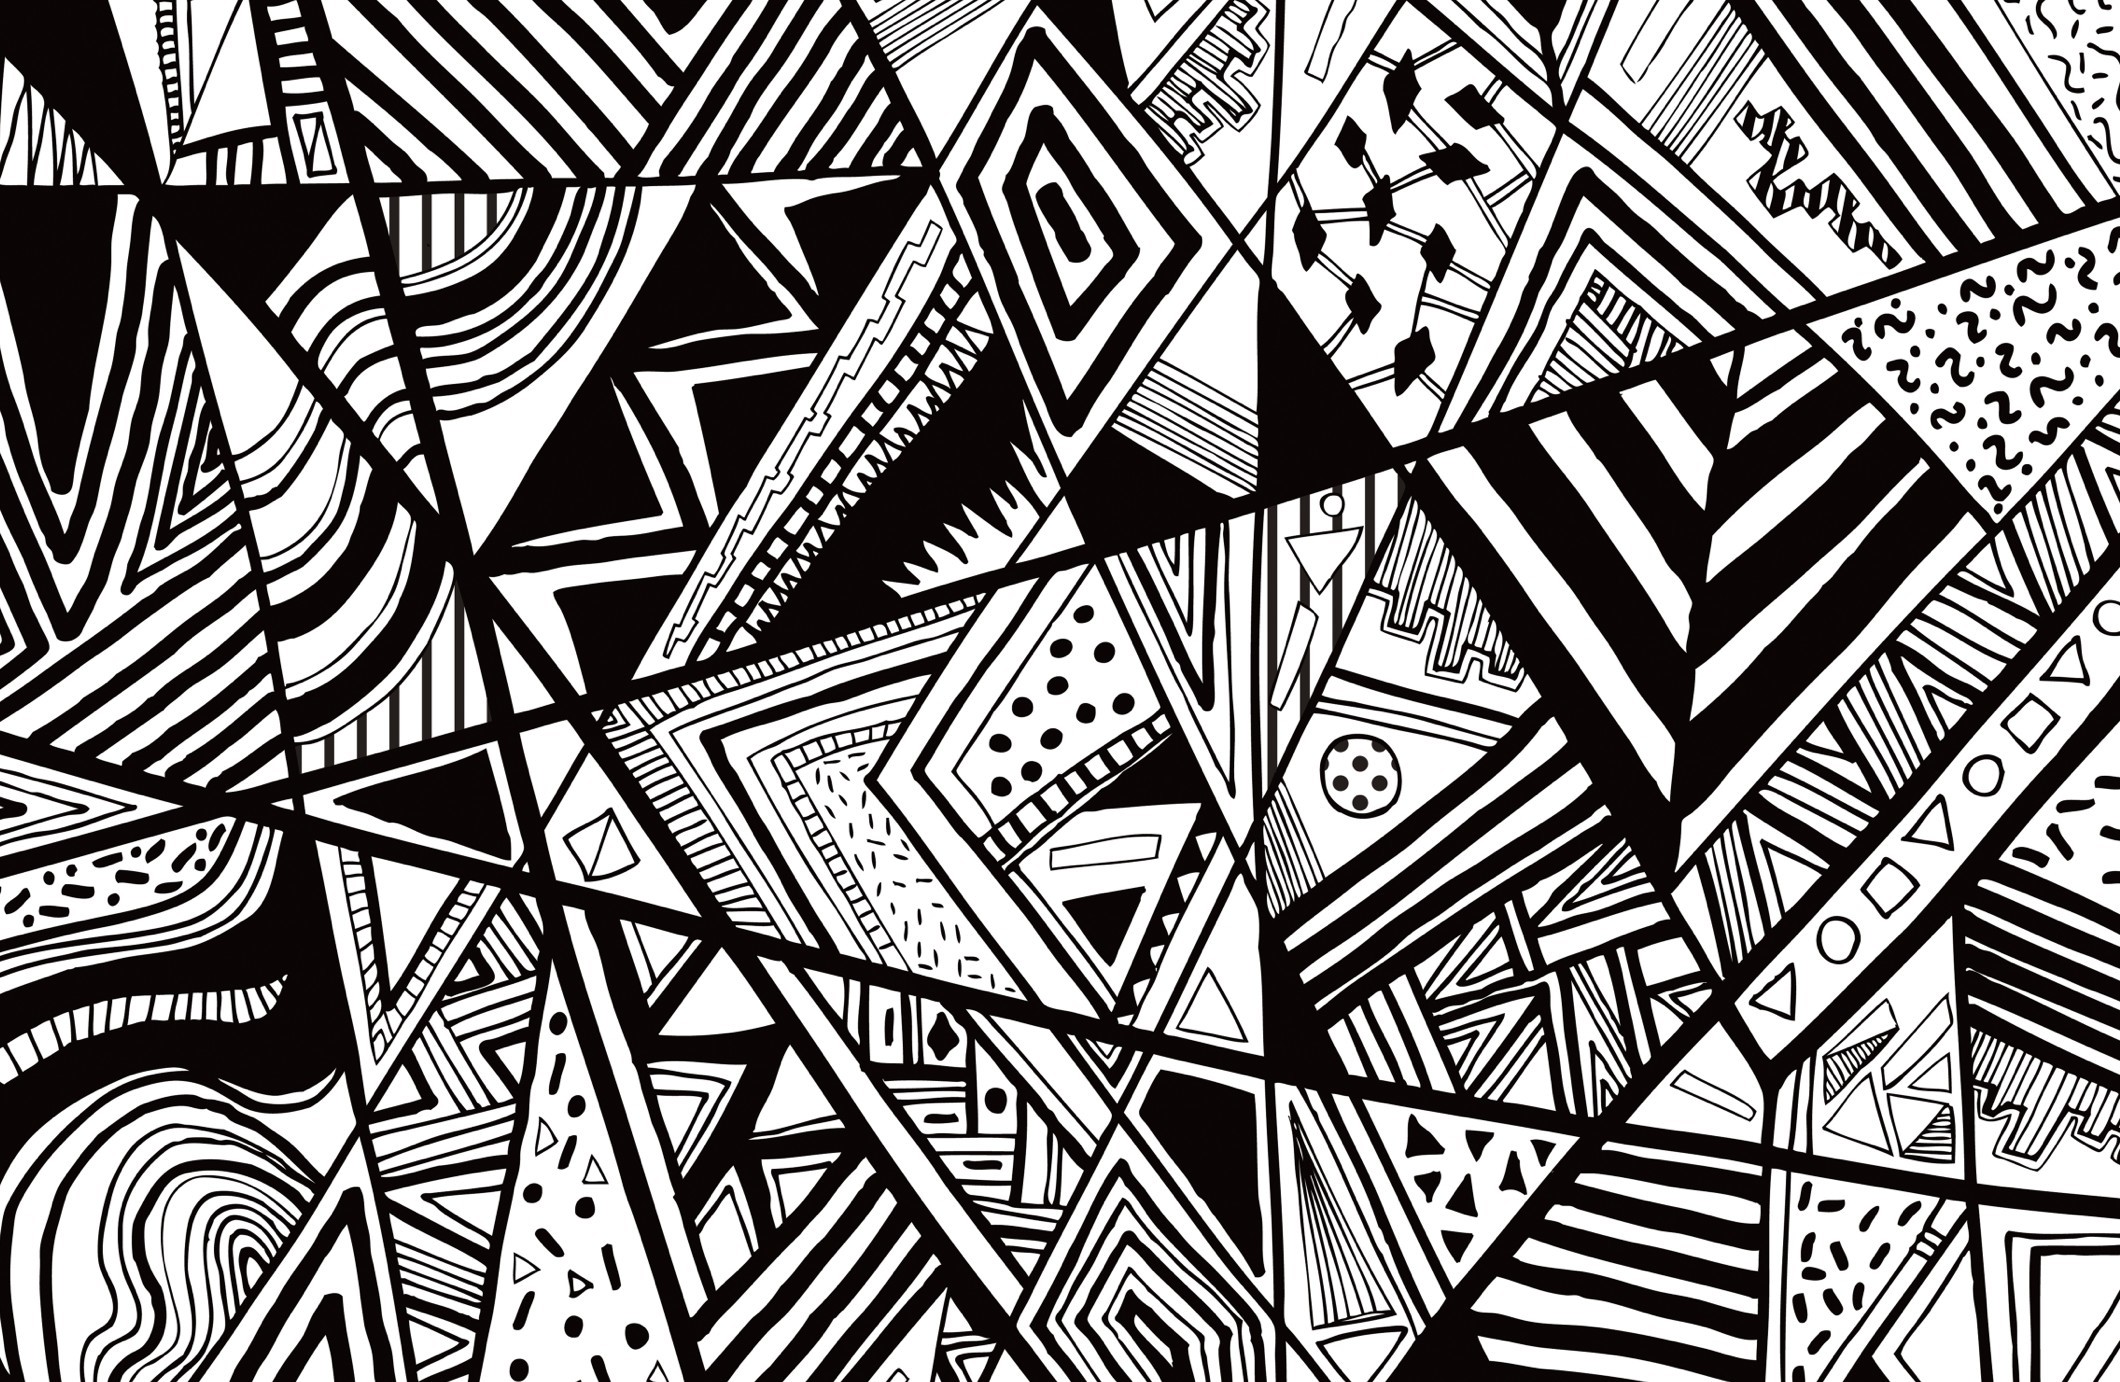 2120x1382 Pics s Black And White Abstract Wallpaper 3686 Hd